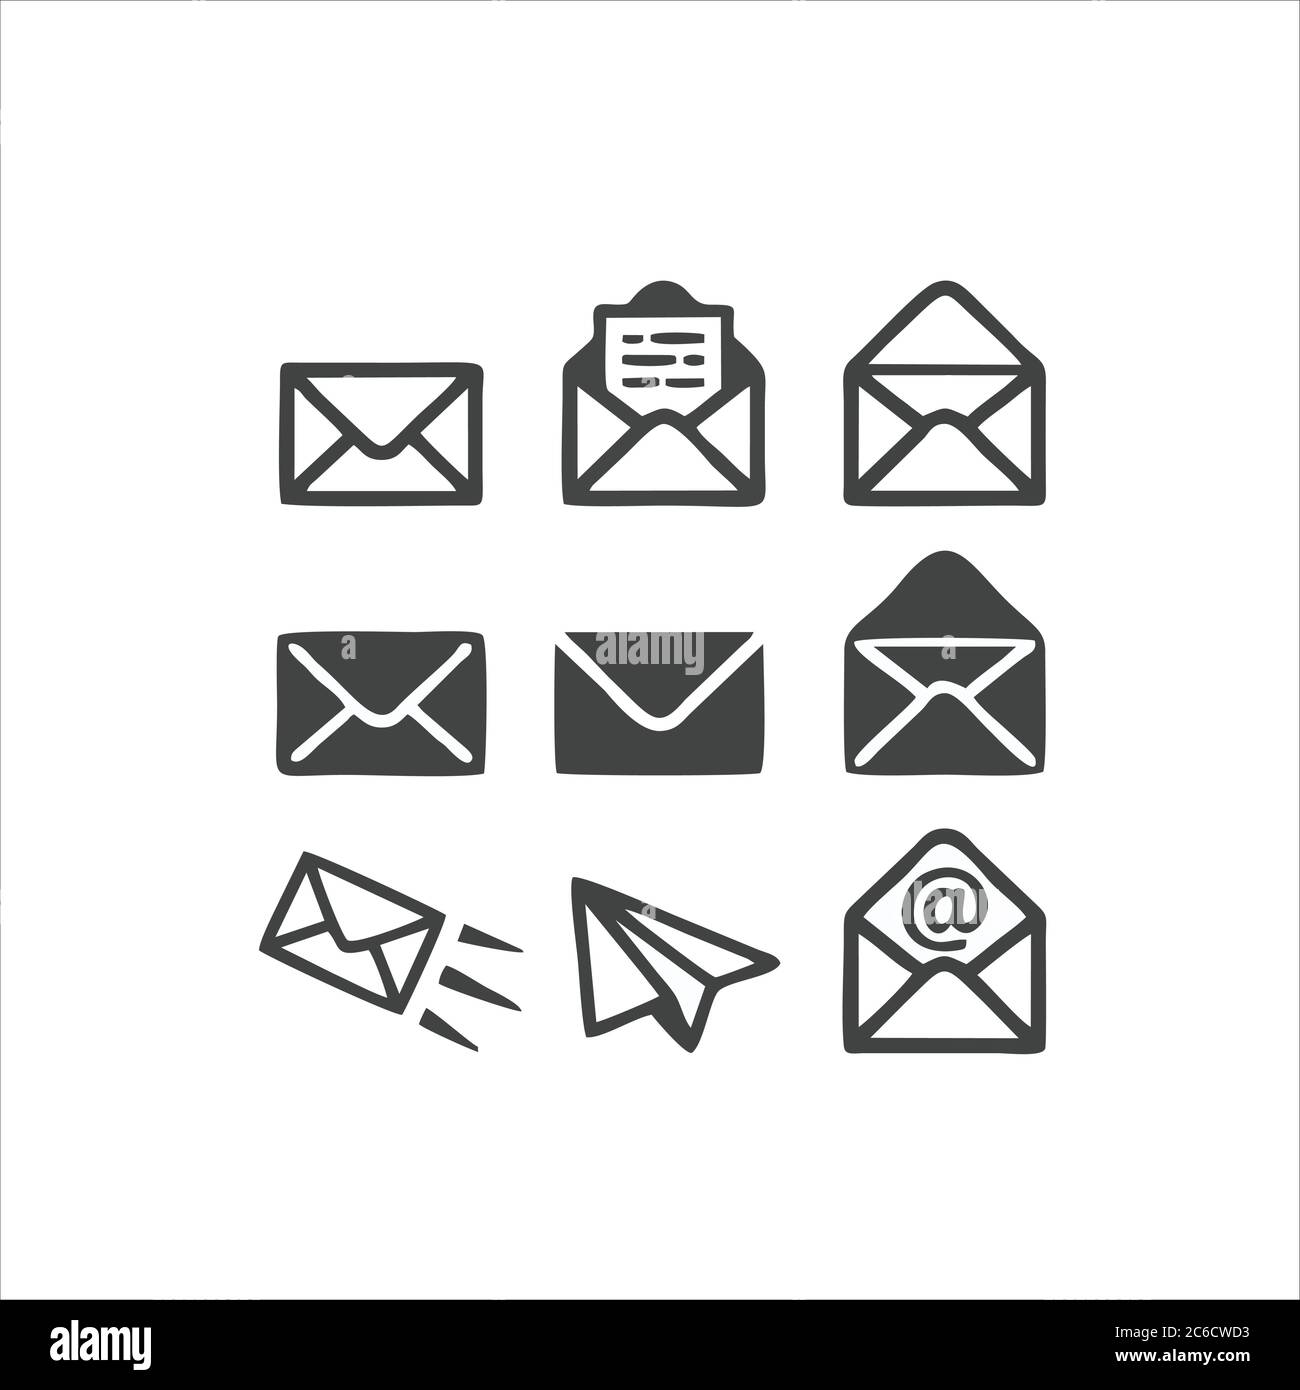 Envelope icon isolated on white background. Envelope icon in trendy design style. Envelope vector icon modern and simple flat symbol for web Stock Vector